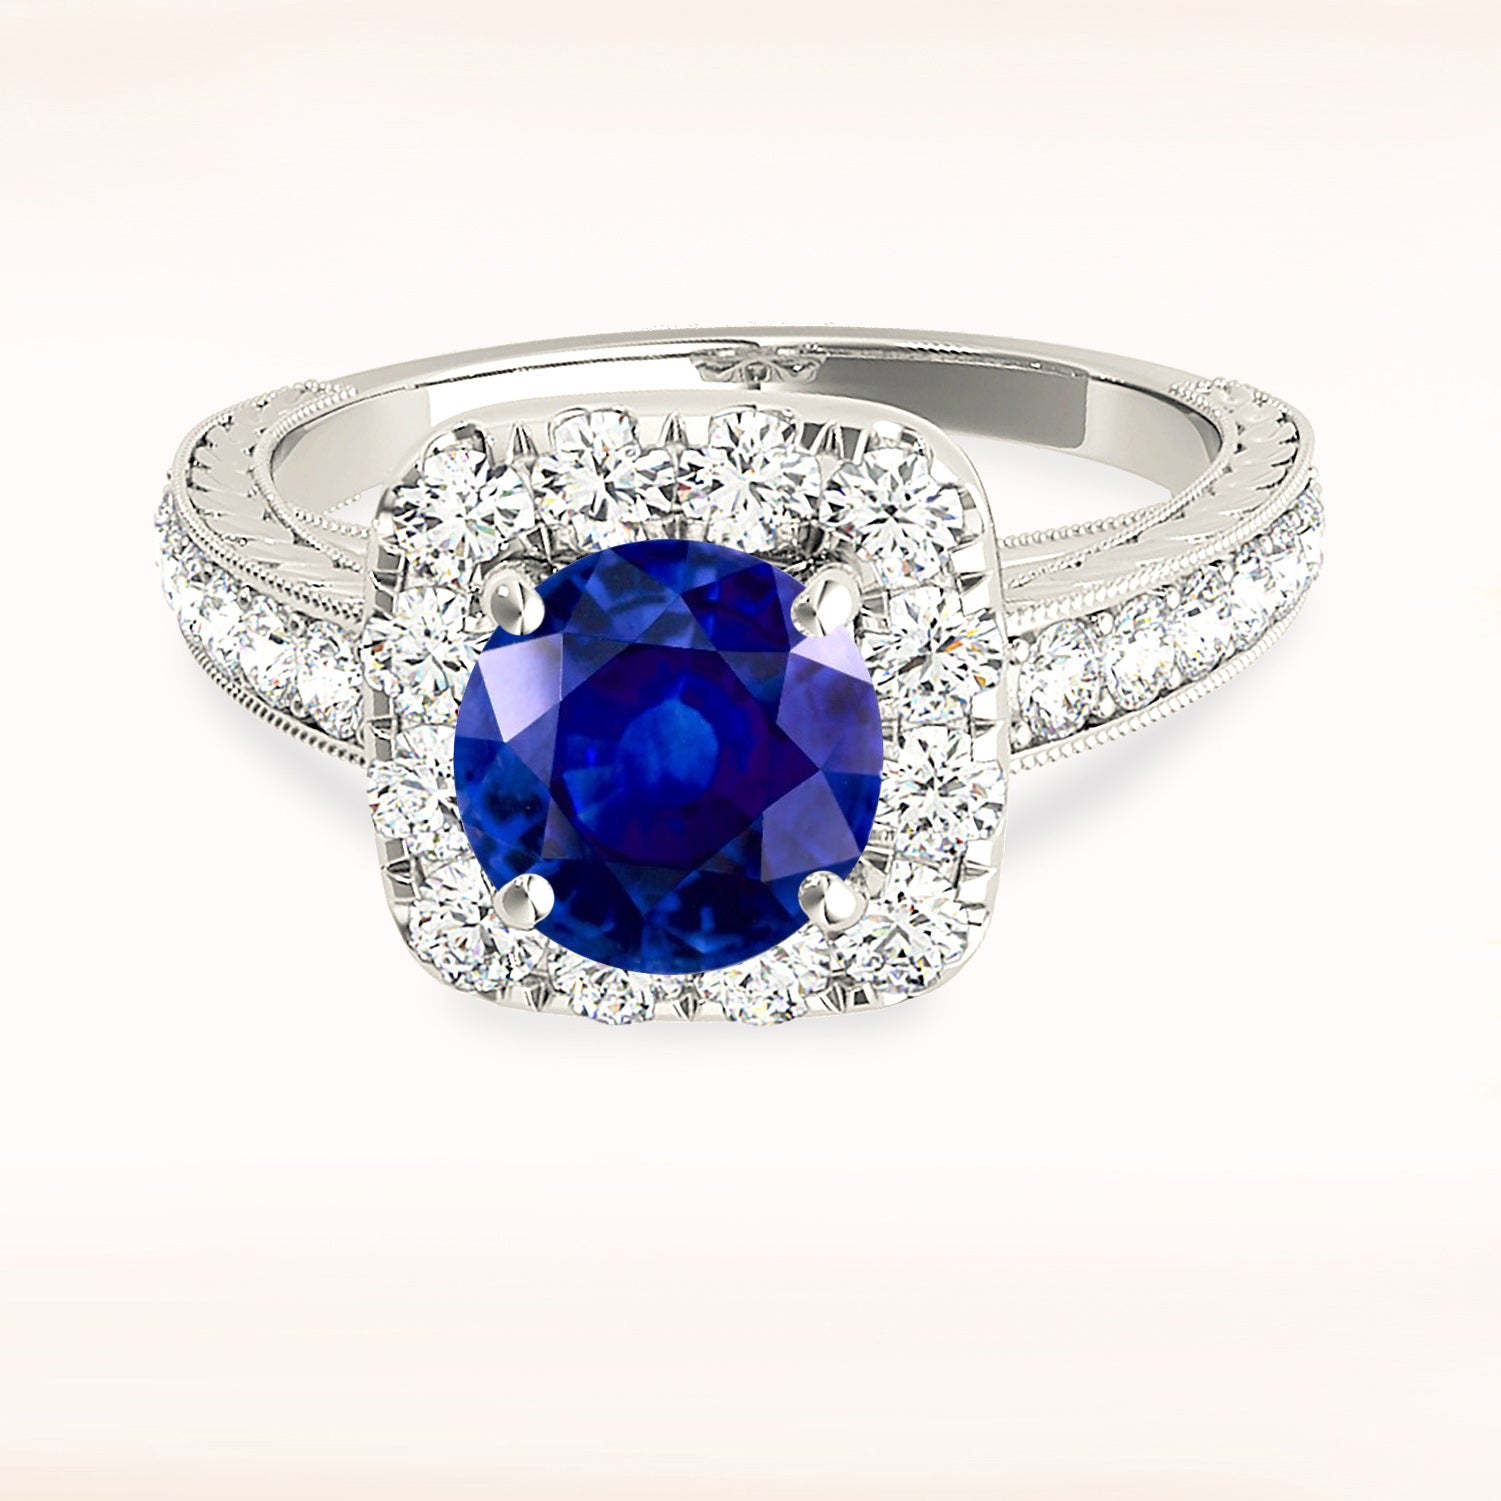 2.41 ct. Genuine Blue Sapphire Gallery Work Halo Ring with 0.50 ctw. Halo And Milgrain Hand Carved Band | Halo Blue Sapphire Classic Ring-in 14K/18K White, Yellow, Rose Gold and Platinum - Christmas Jewelry Gift -VIRABYANI